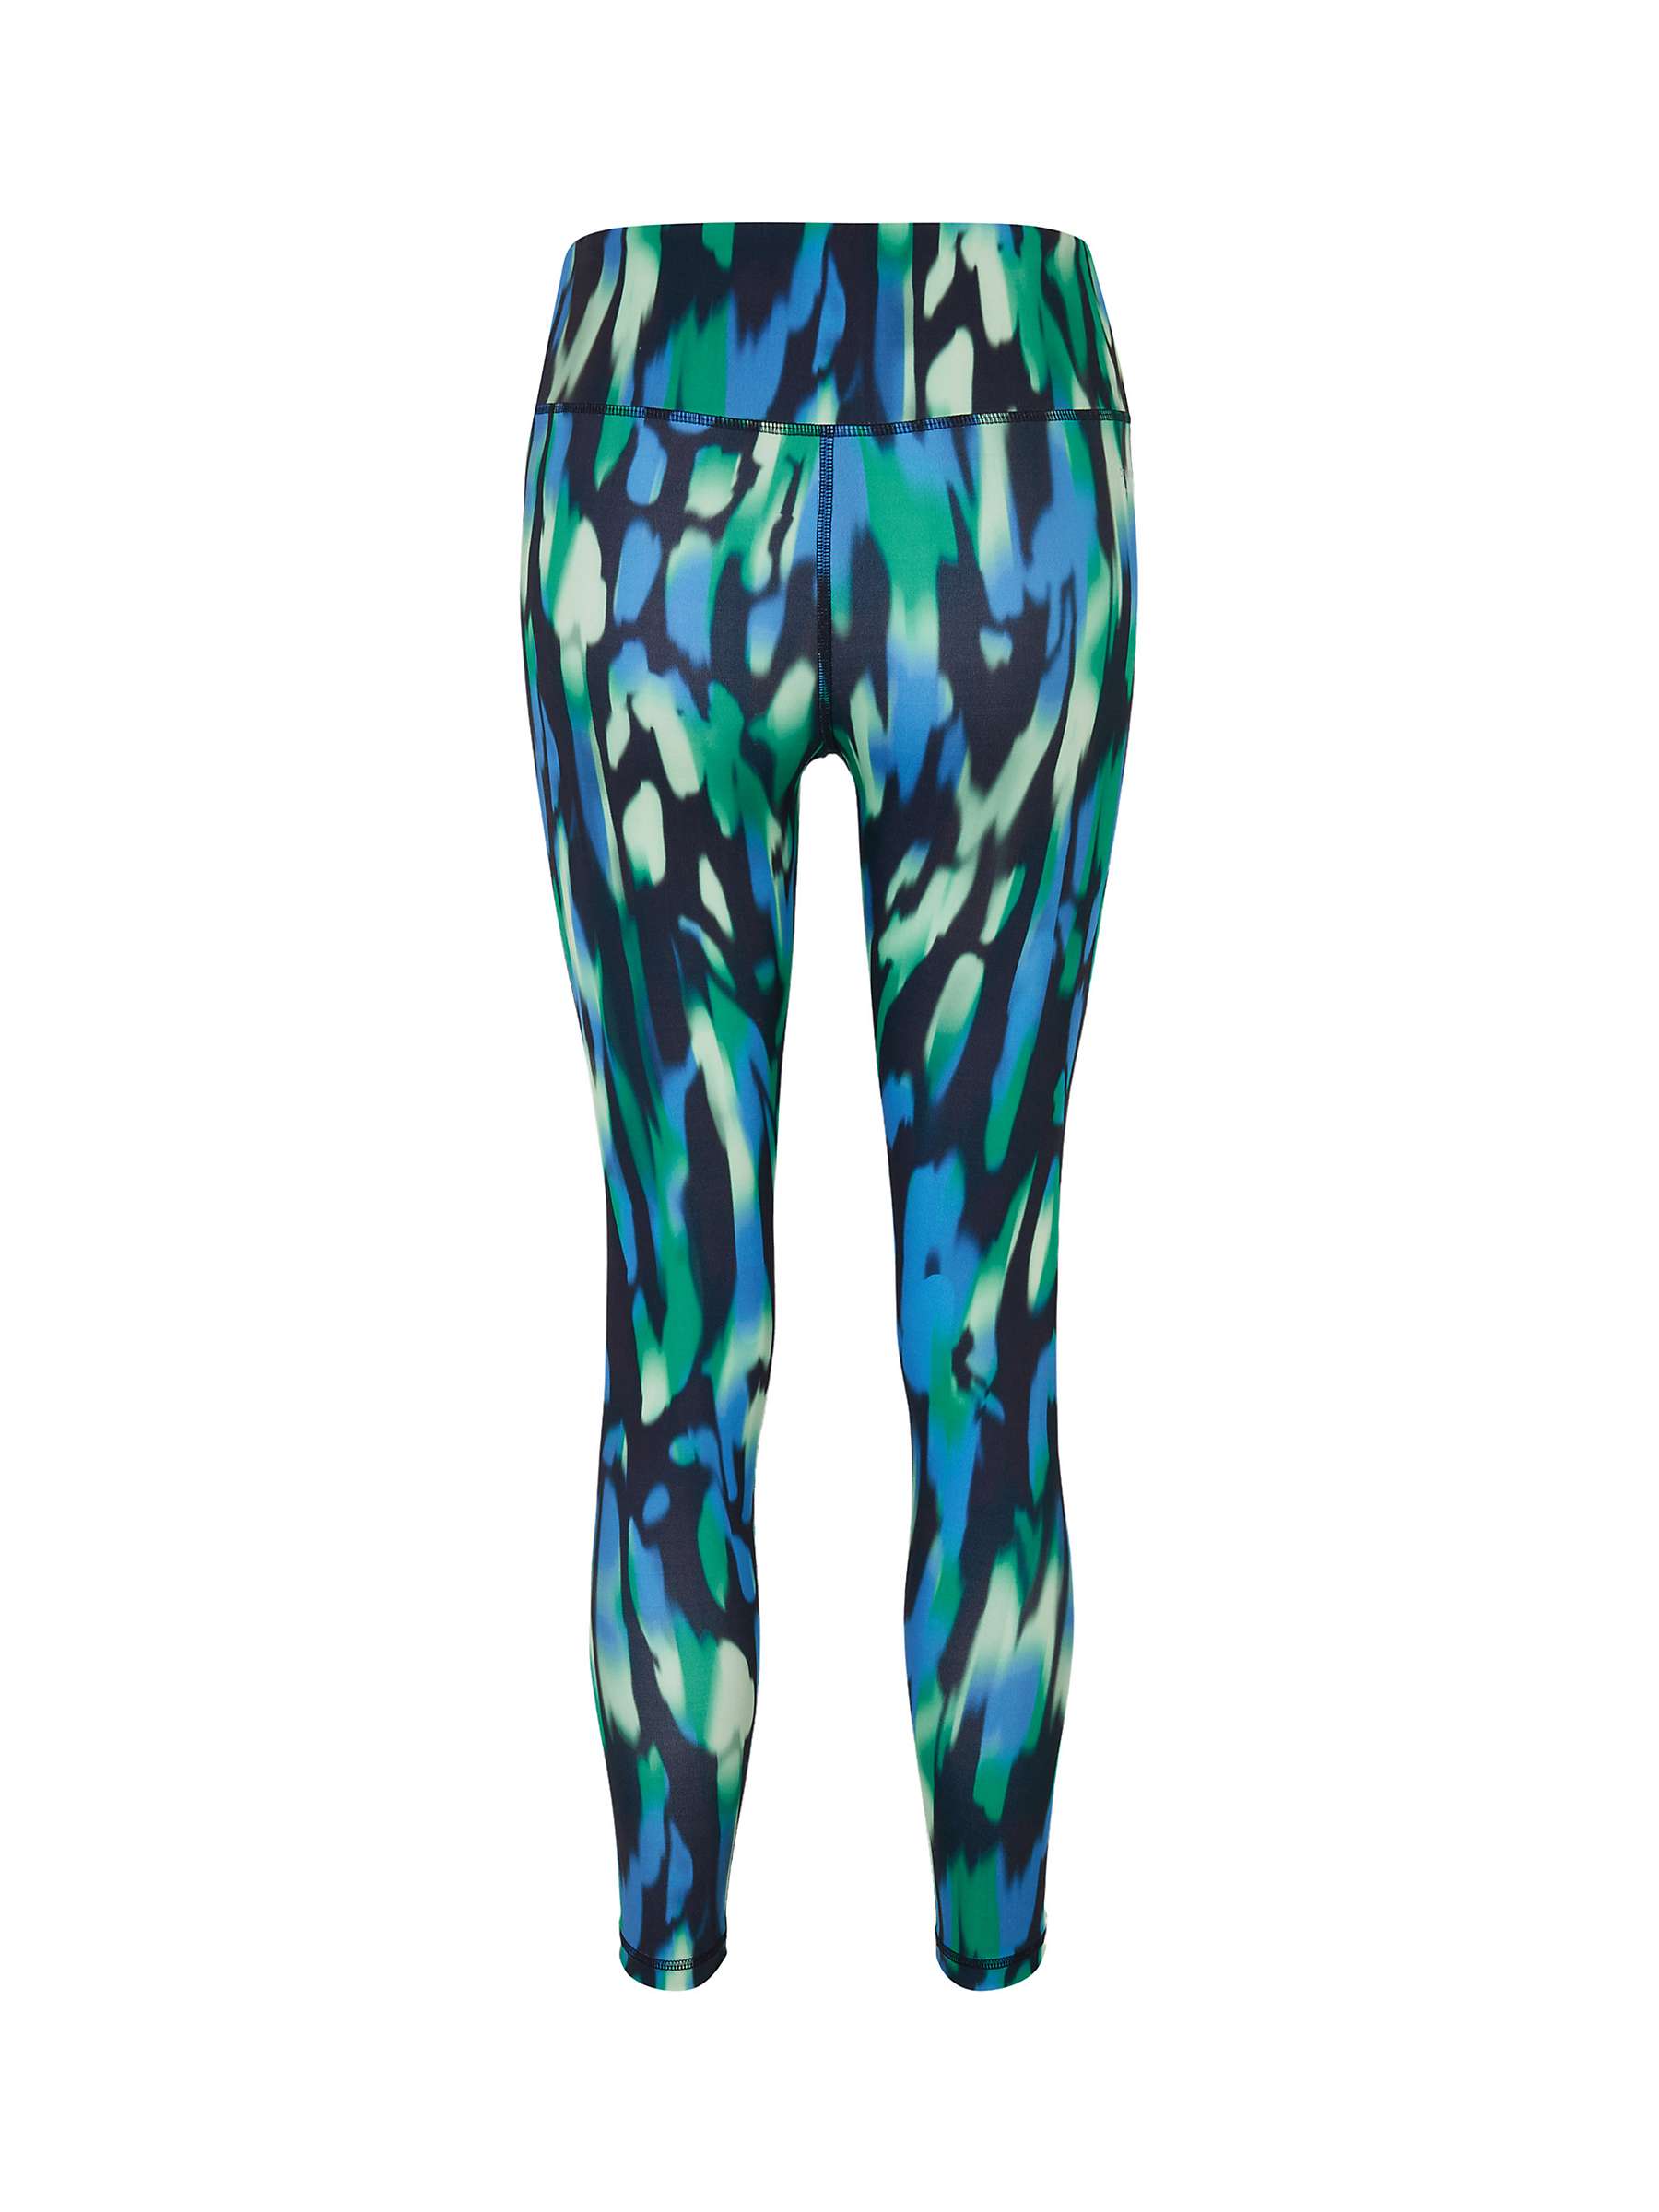 Buy Venice Beach Prudence Abstract Sports Leggings, Multi Online at johnlewis.com